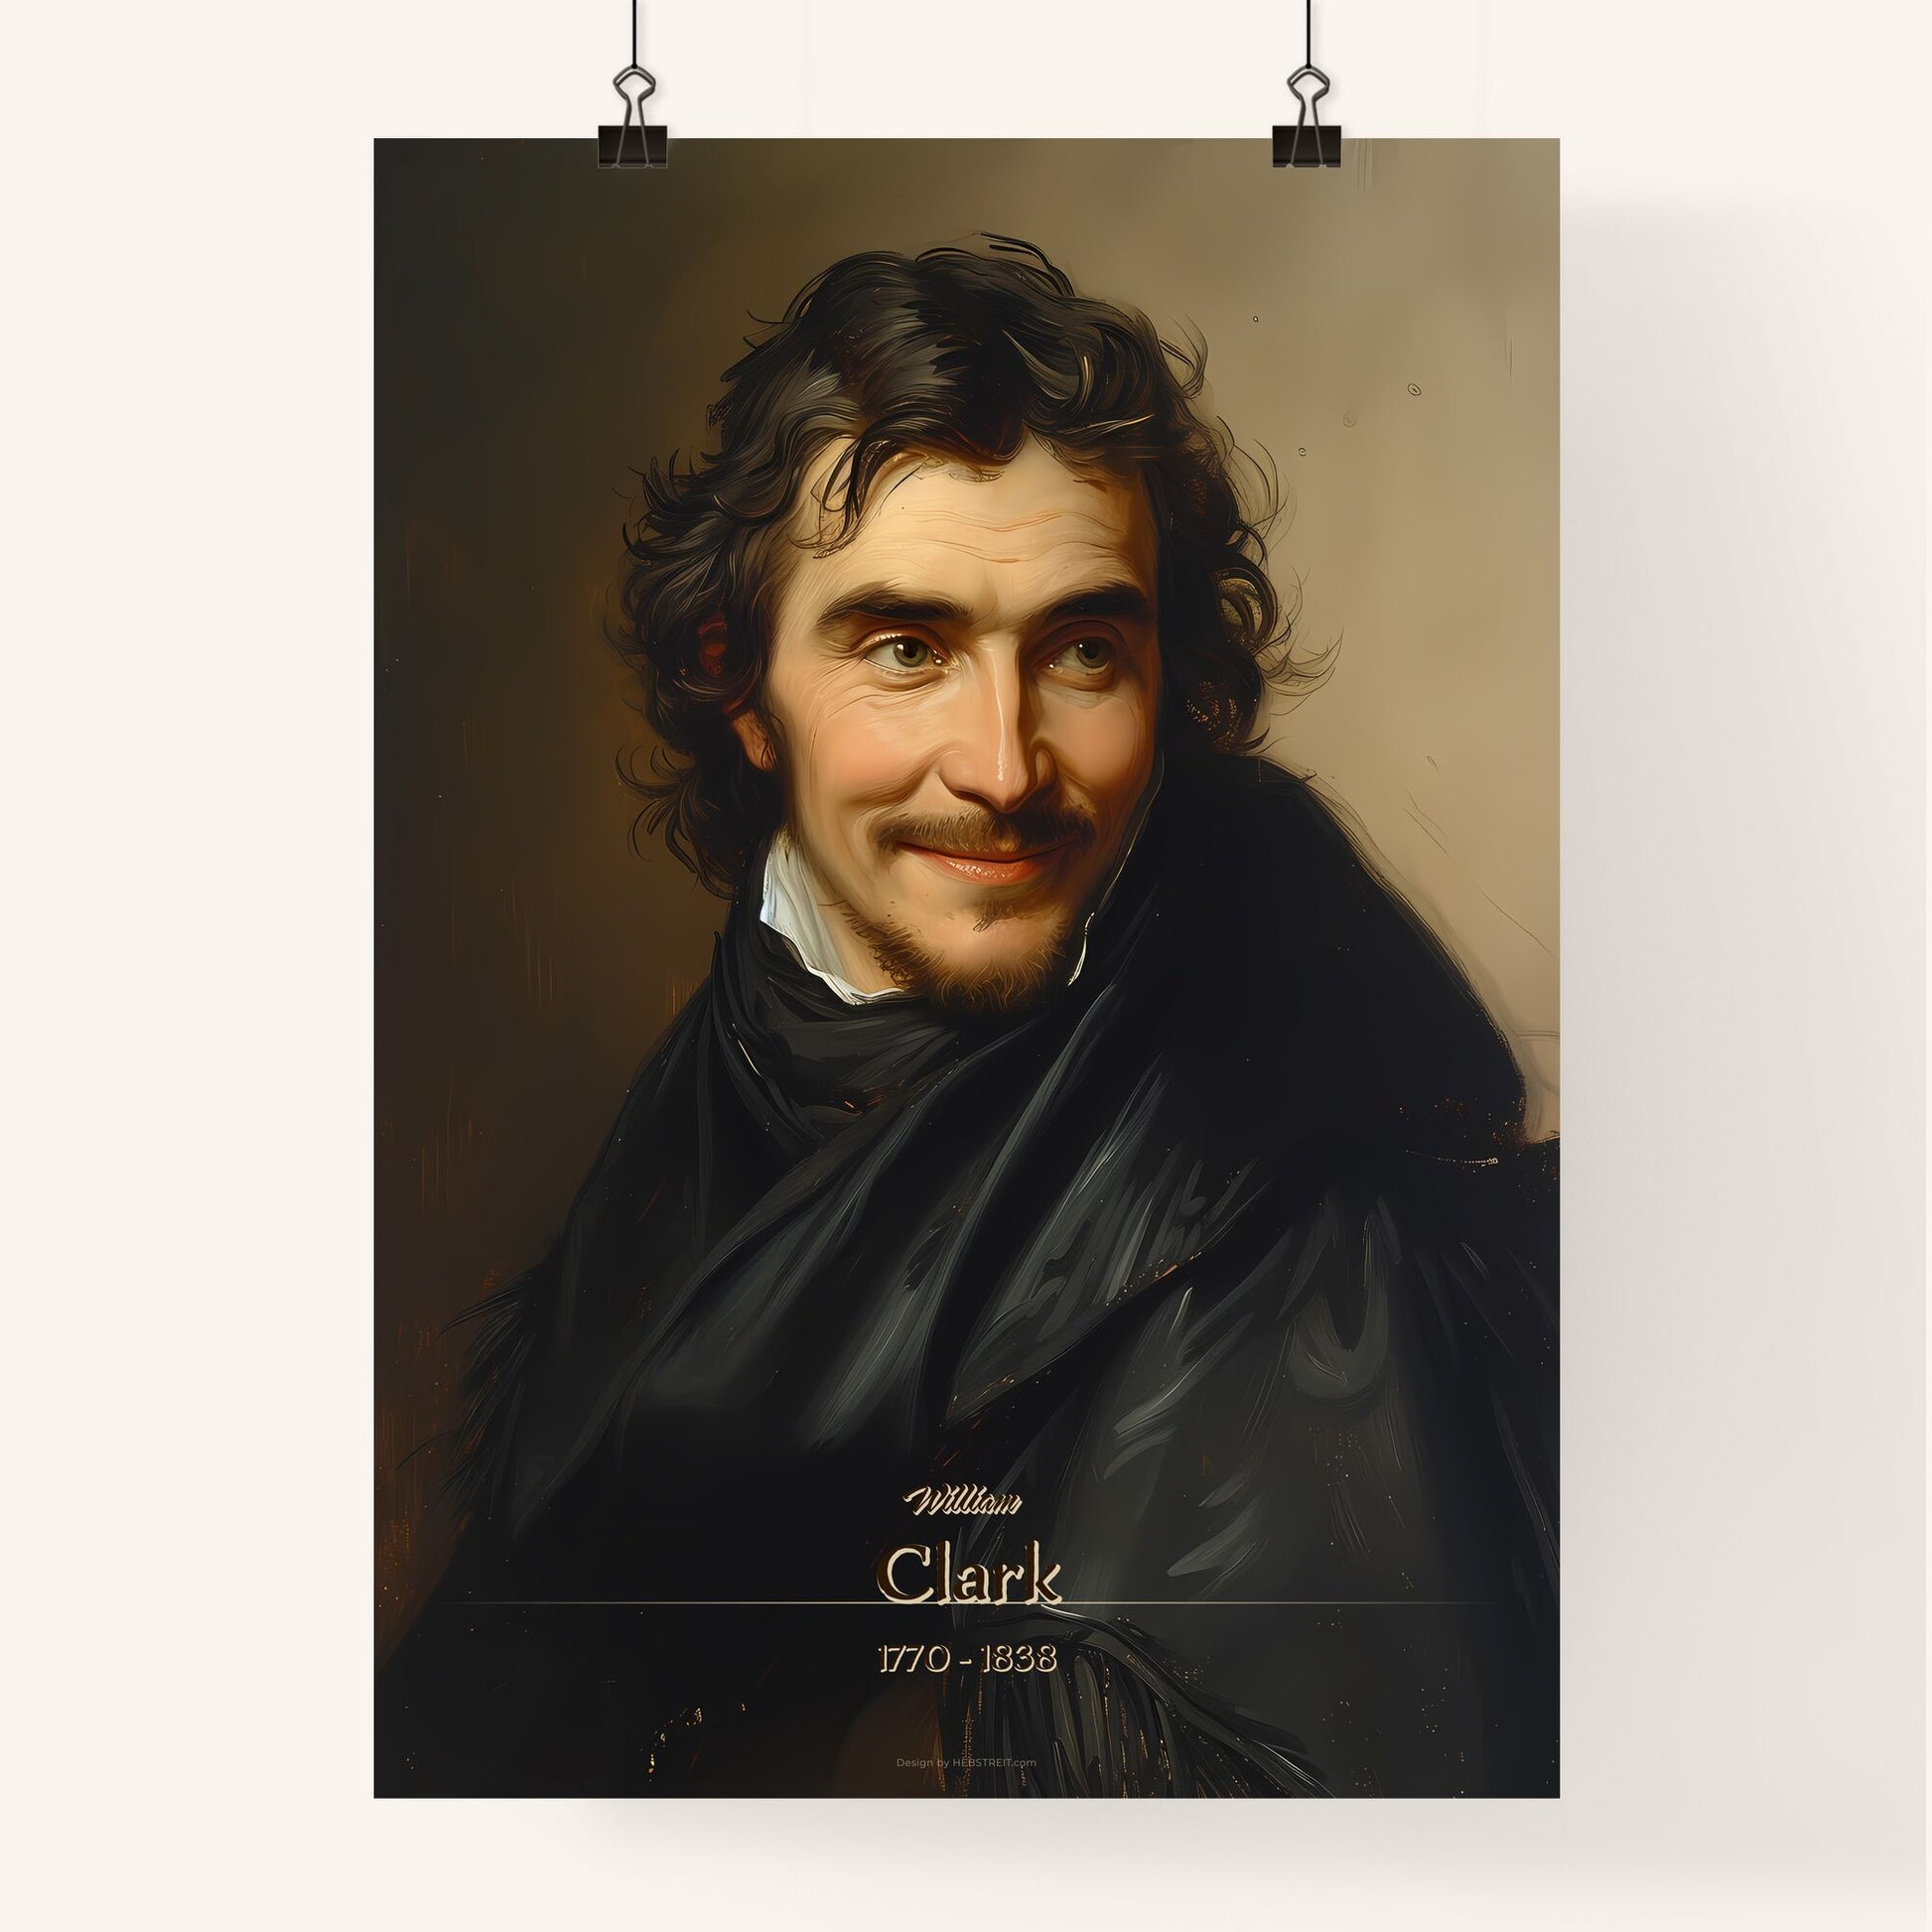 William, Clark, 1770 - 1838, A Poster of a man in a black robe Default Title